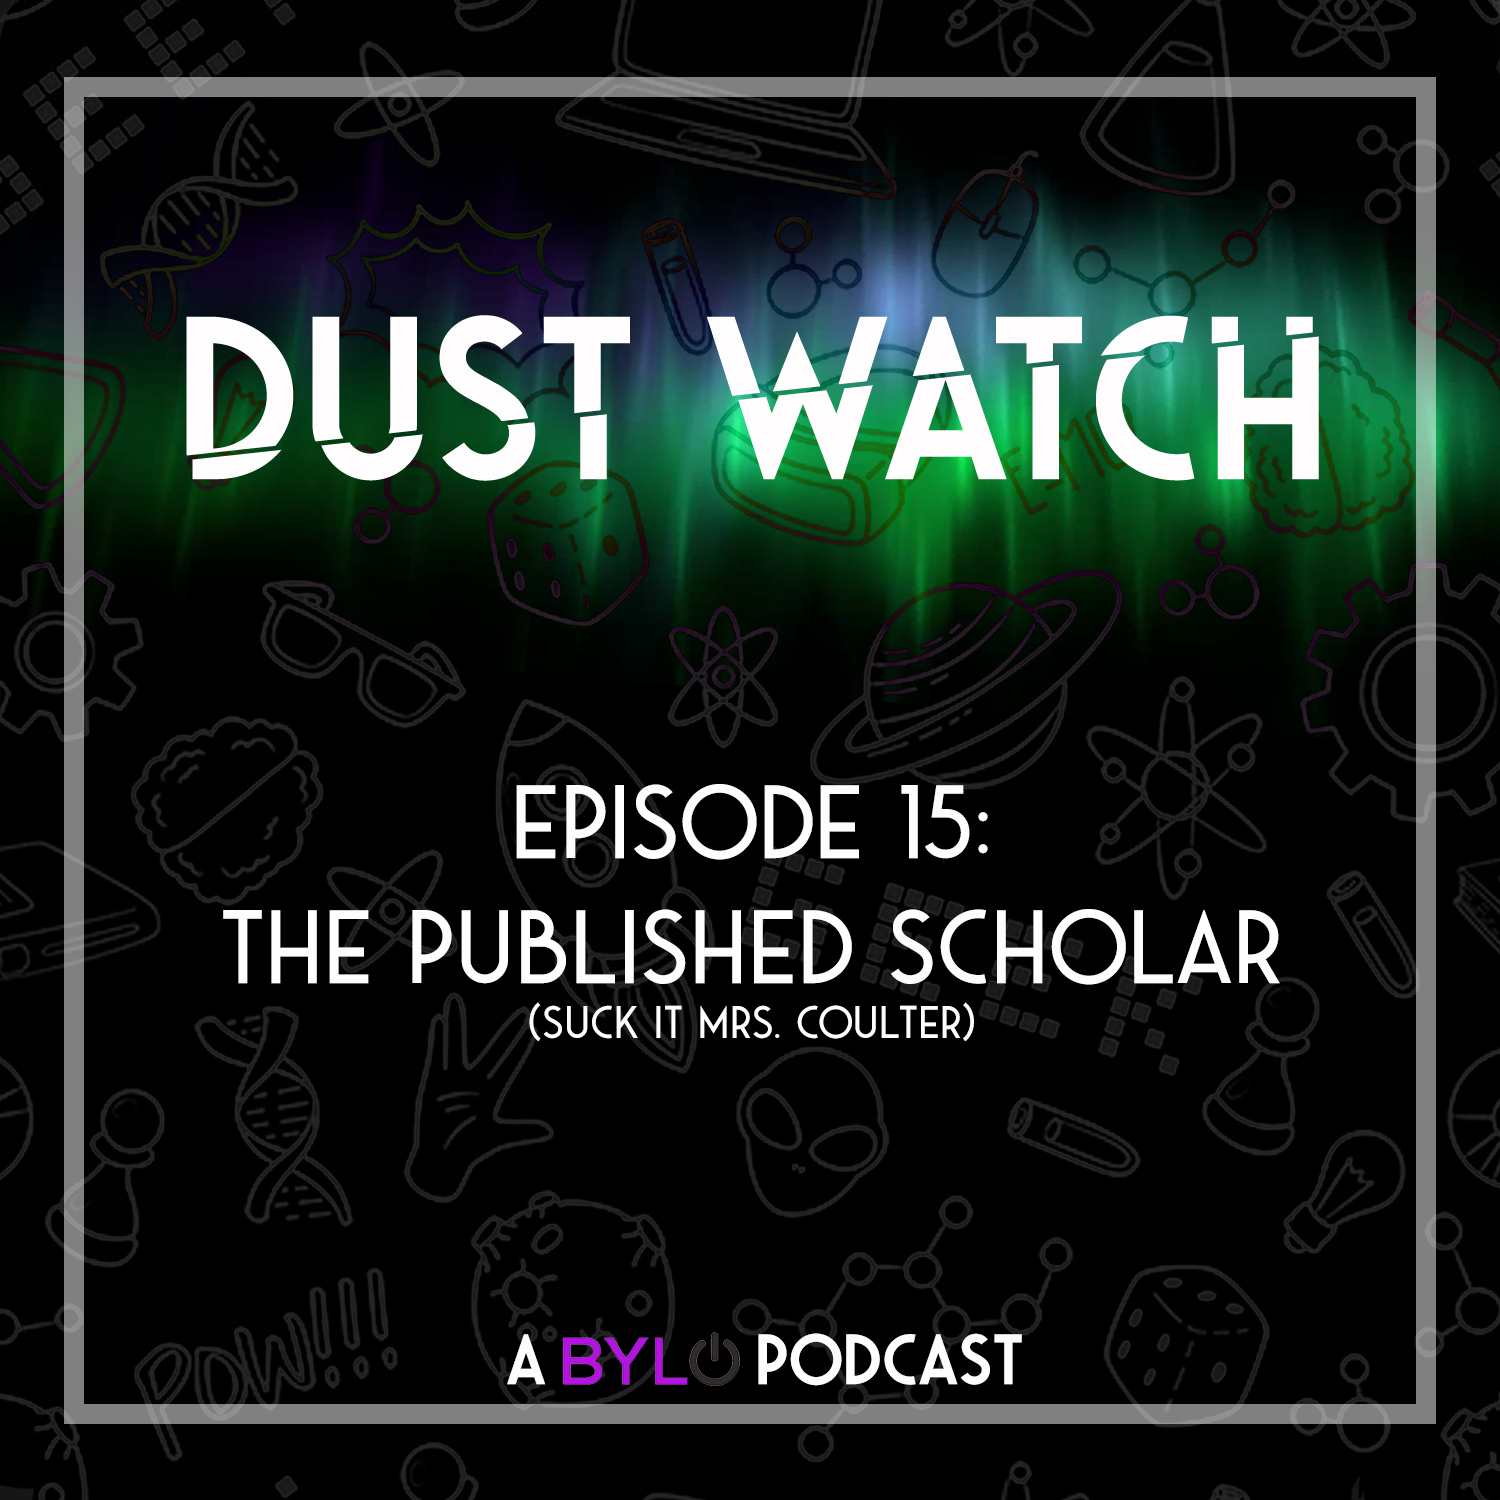 Dust Watch ep 15: Season 2 - The PUBLISHED Scholar